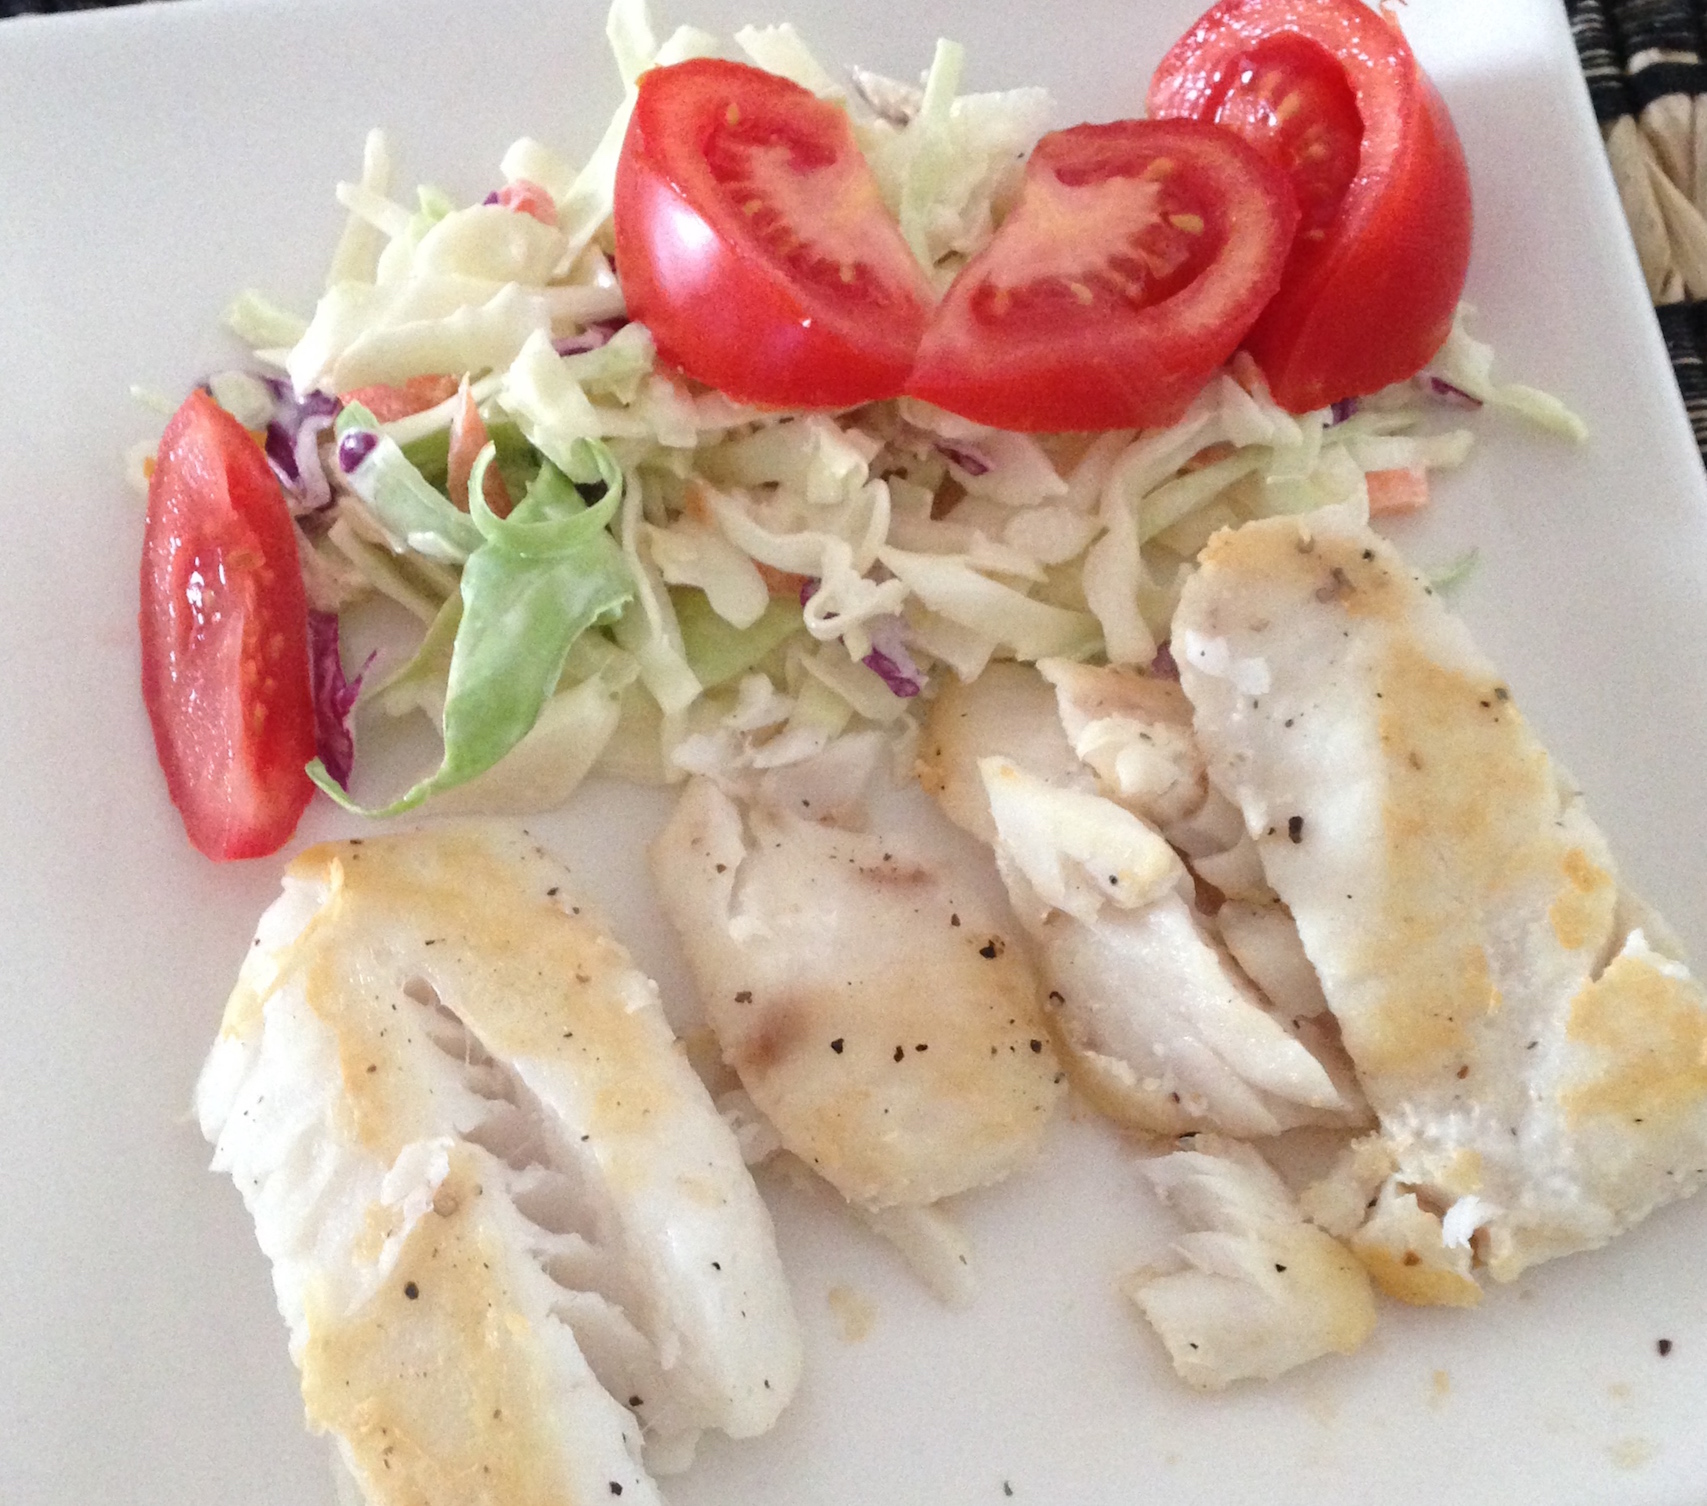 pan fried fish with a side salad